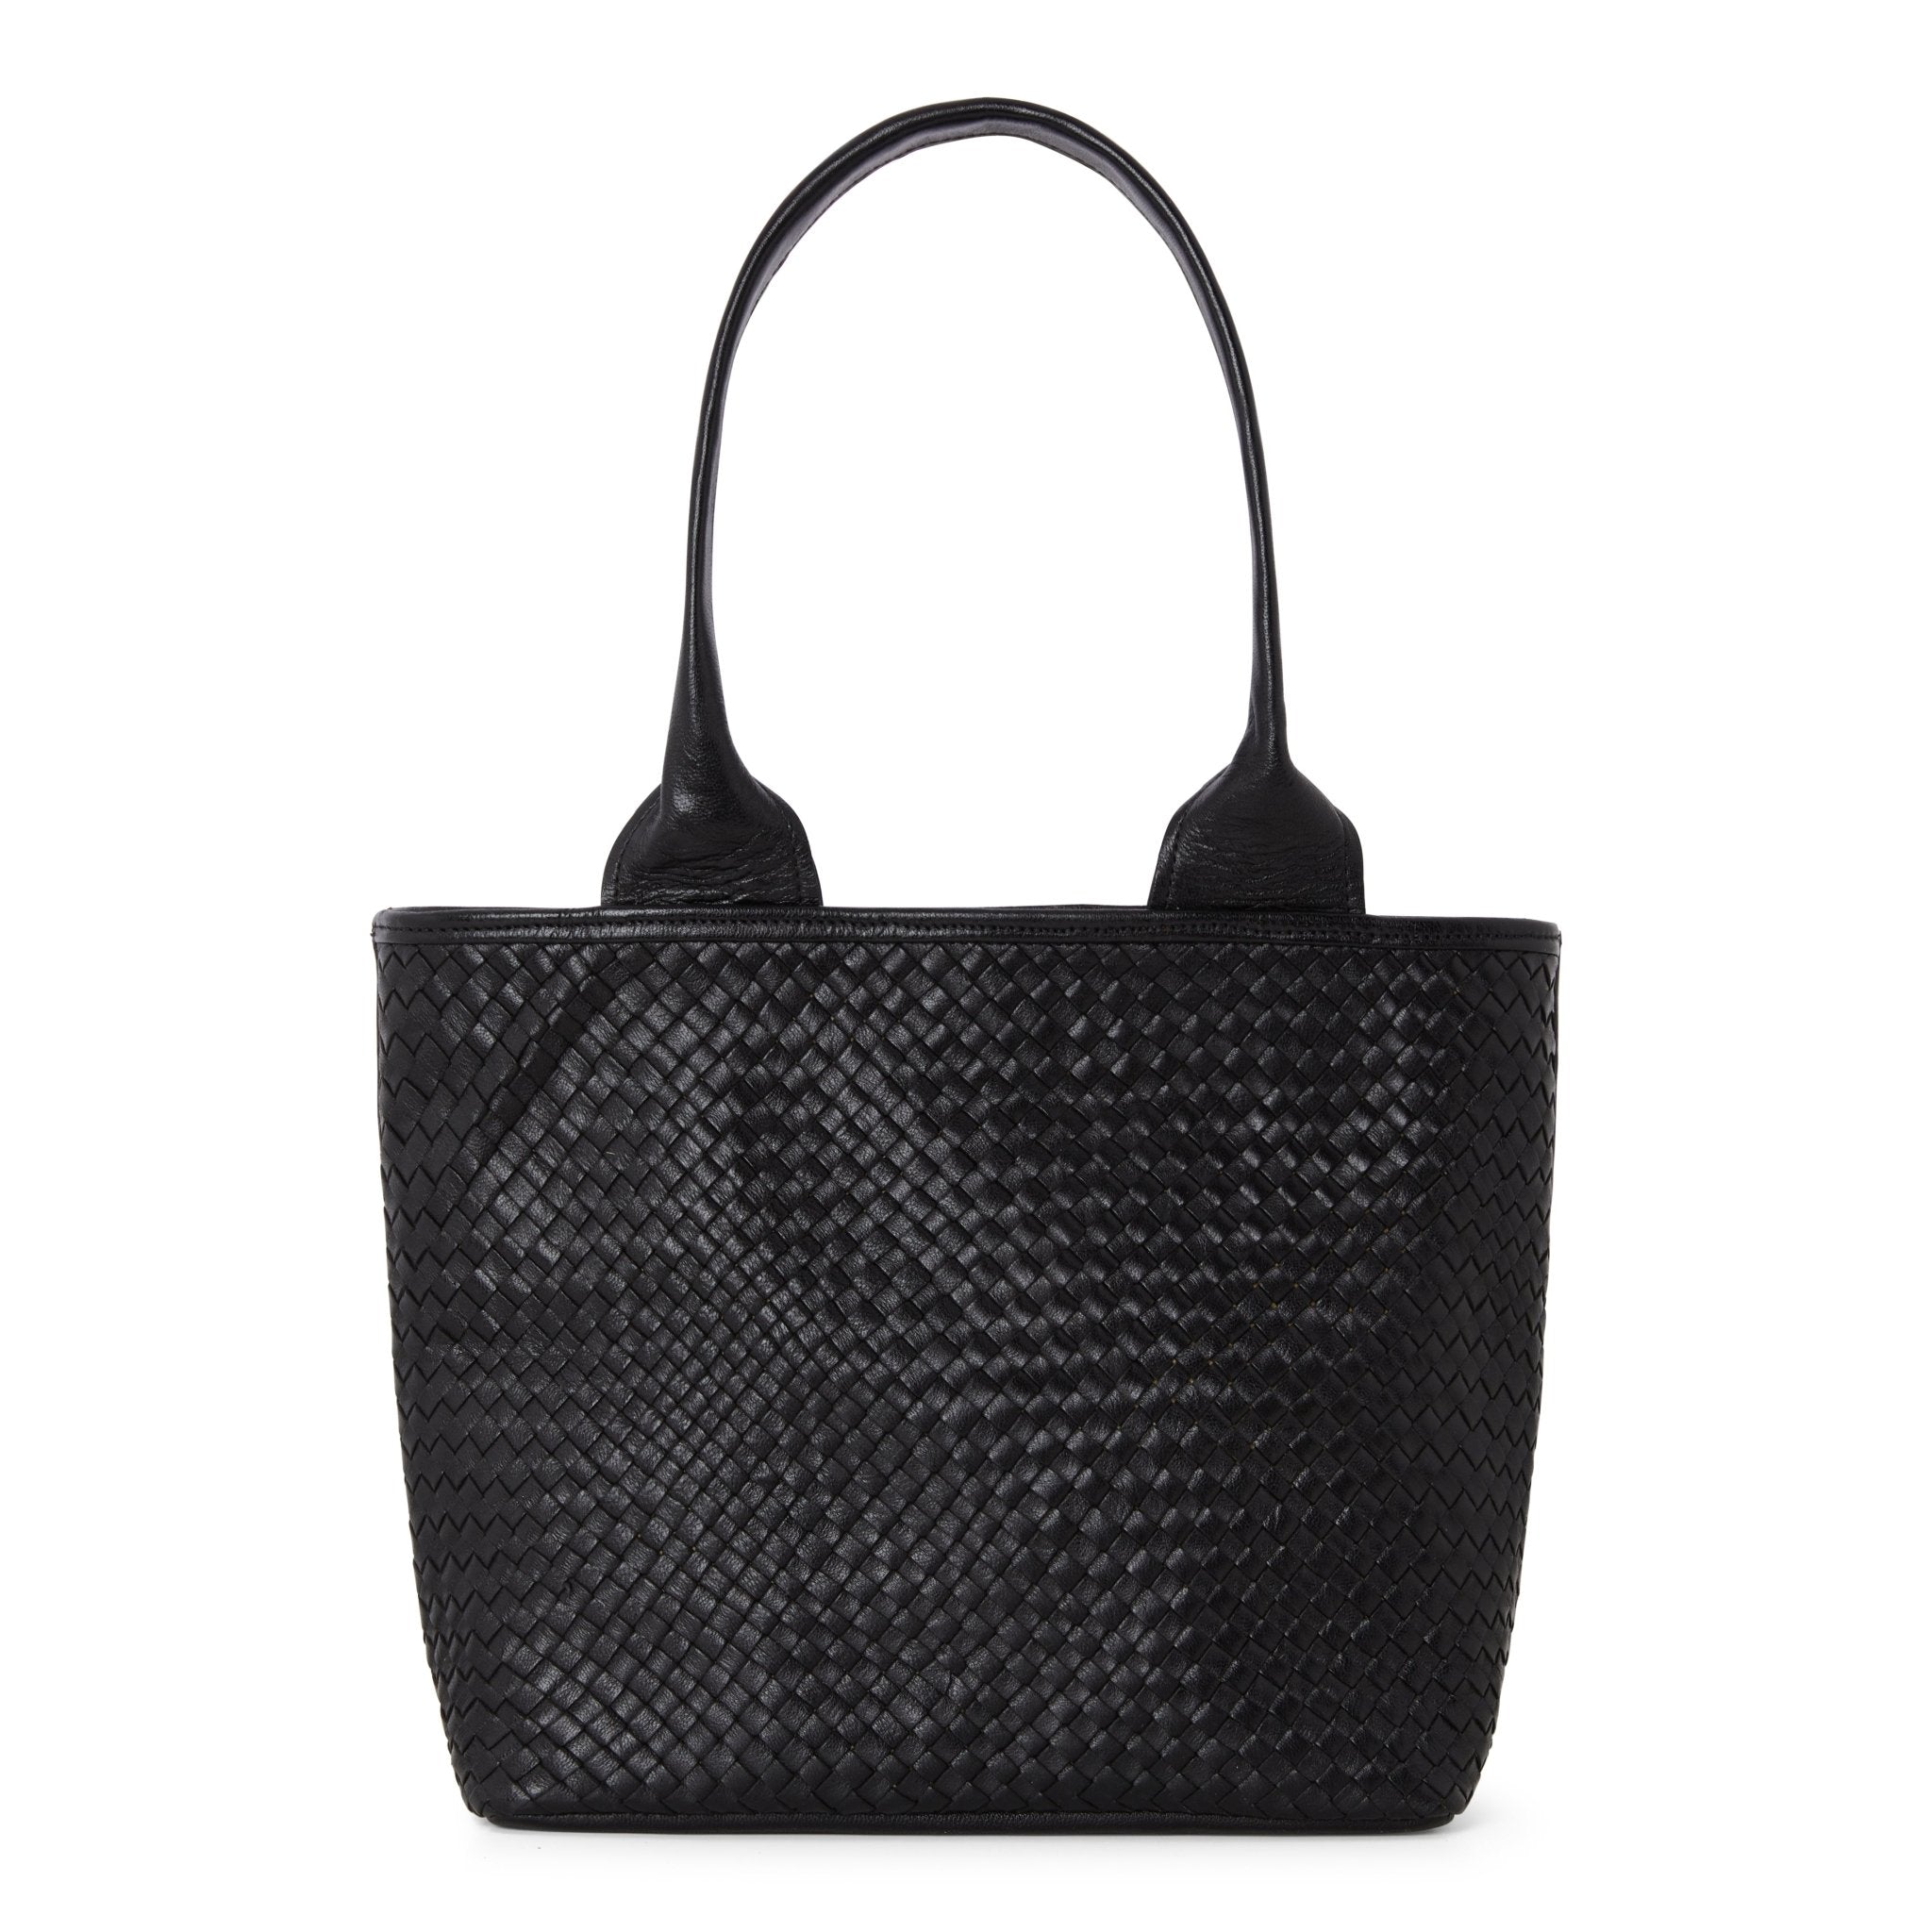 Leather Woven Tote Black - Artisan Stories